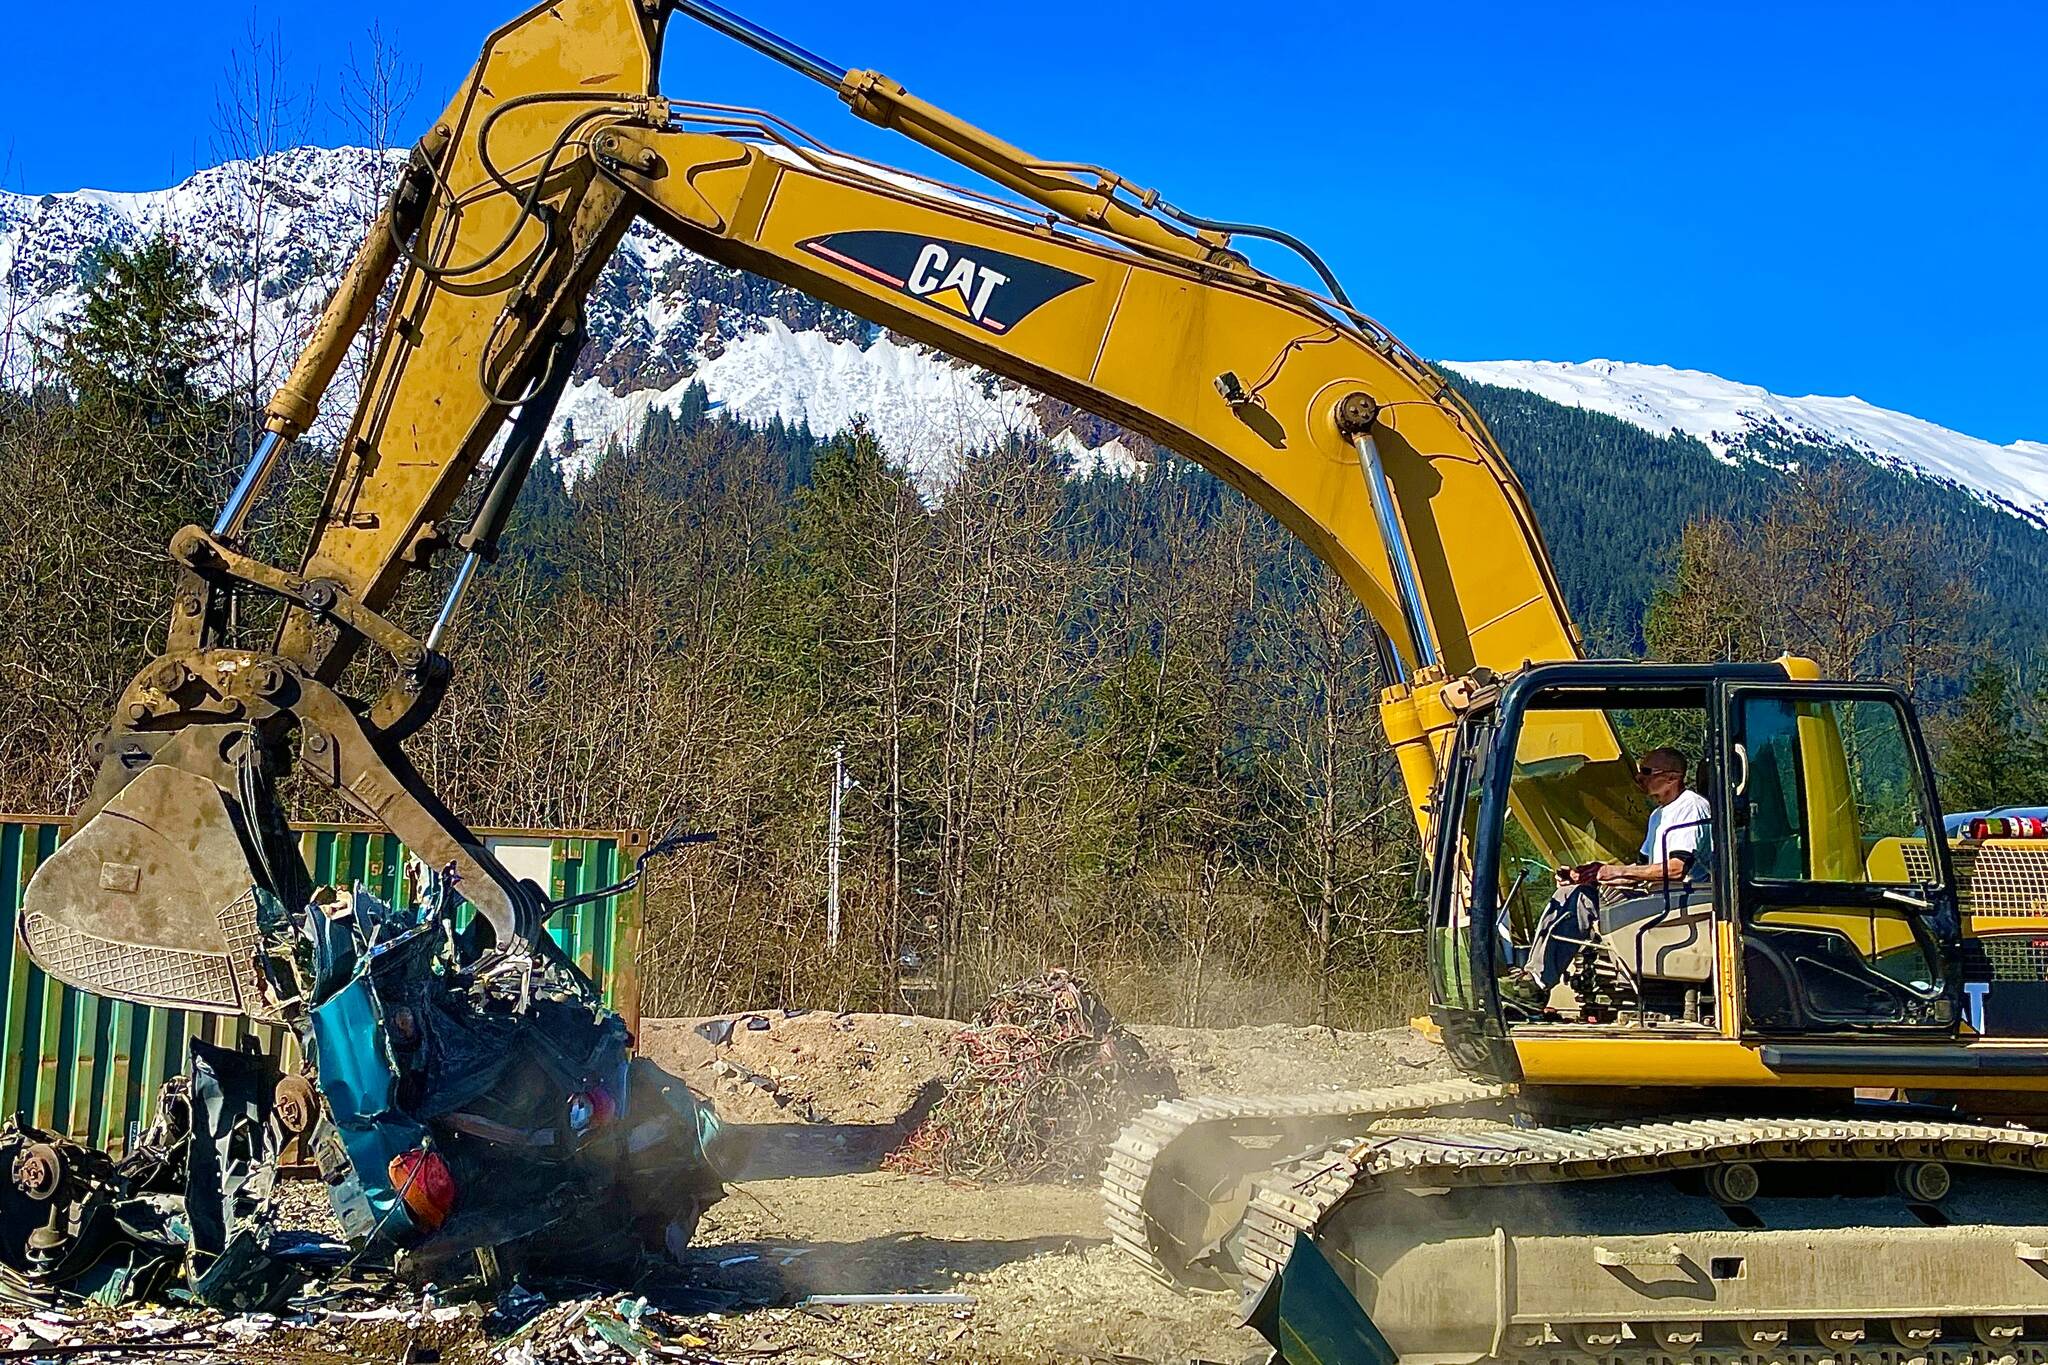 Joe Shockley prepares a car for baling at Skookum Recycling on April 19, 2022. Skookum is partnered with the City and Borough of Juneau to dispose of junk cars for free for the first 50 registrants beginning on April 22, 2022. (Michael S. Lockett / Juneau Empire)